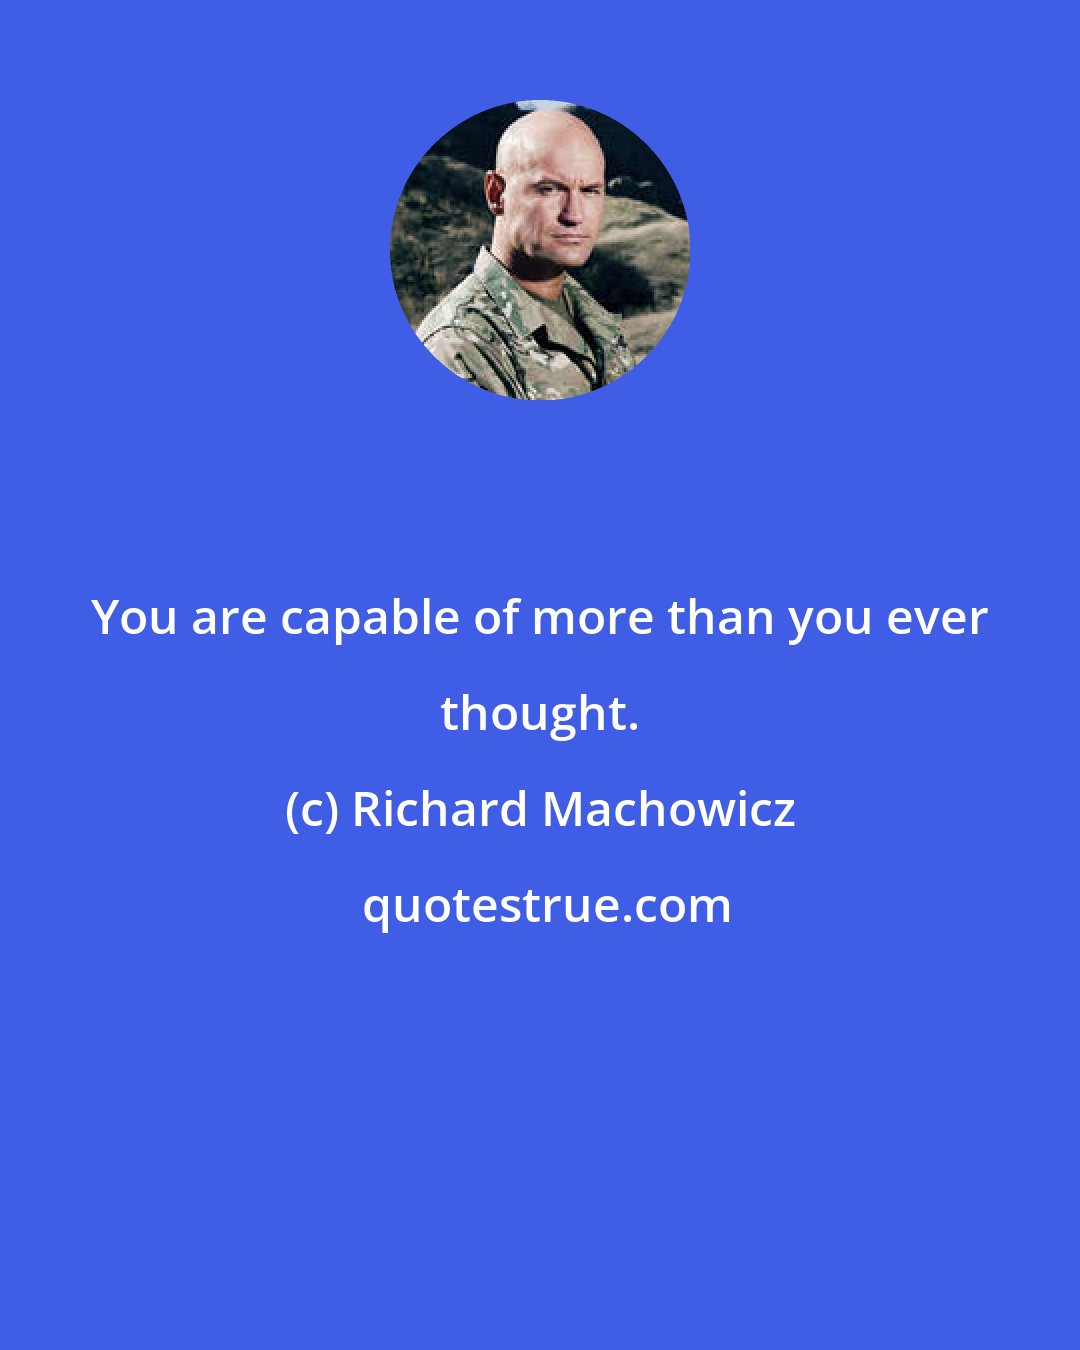 Richard Machowicz: You are capable of more than you ever thought.